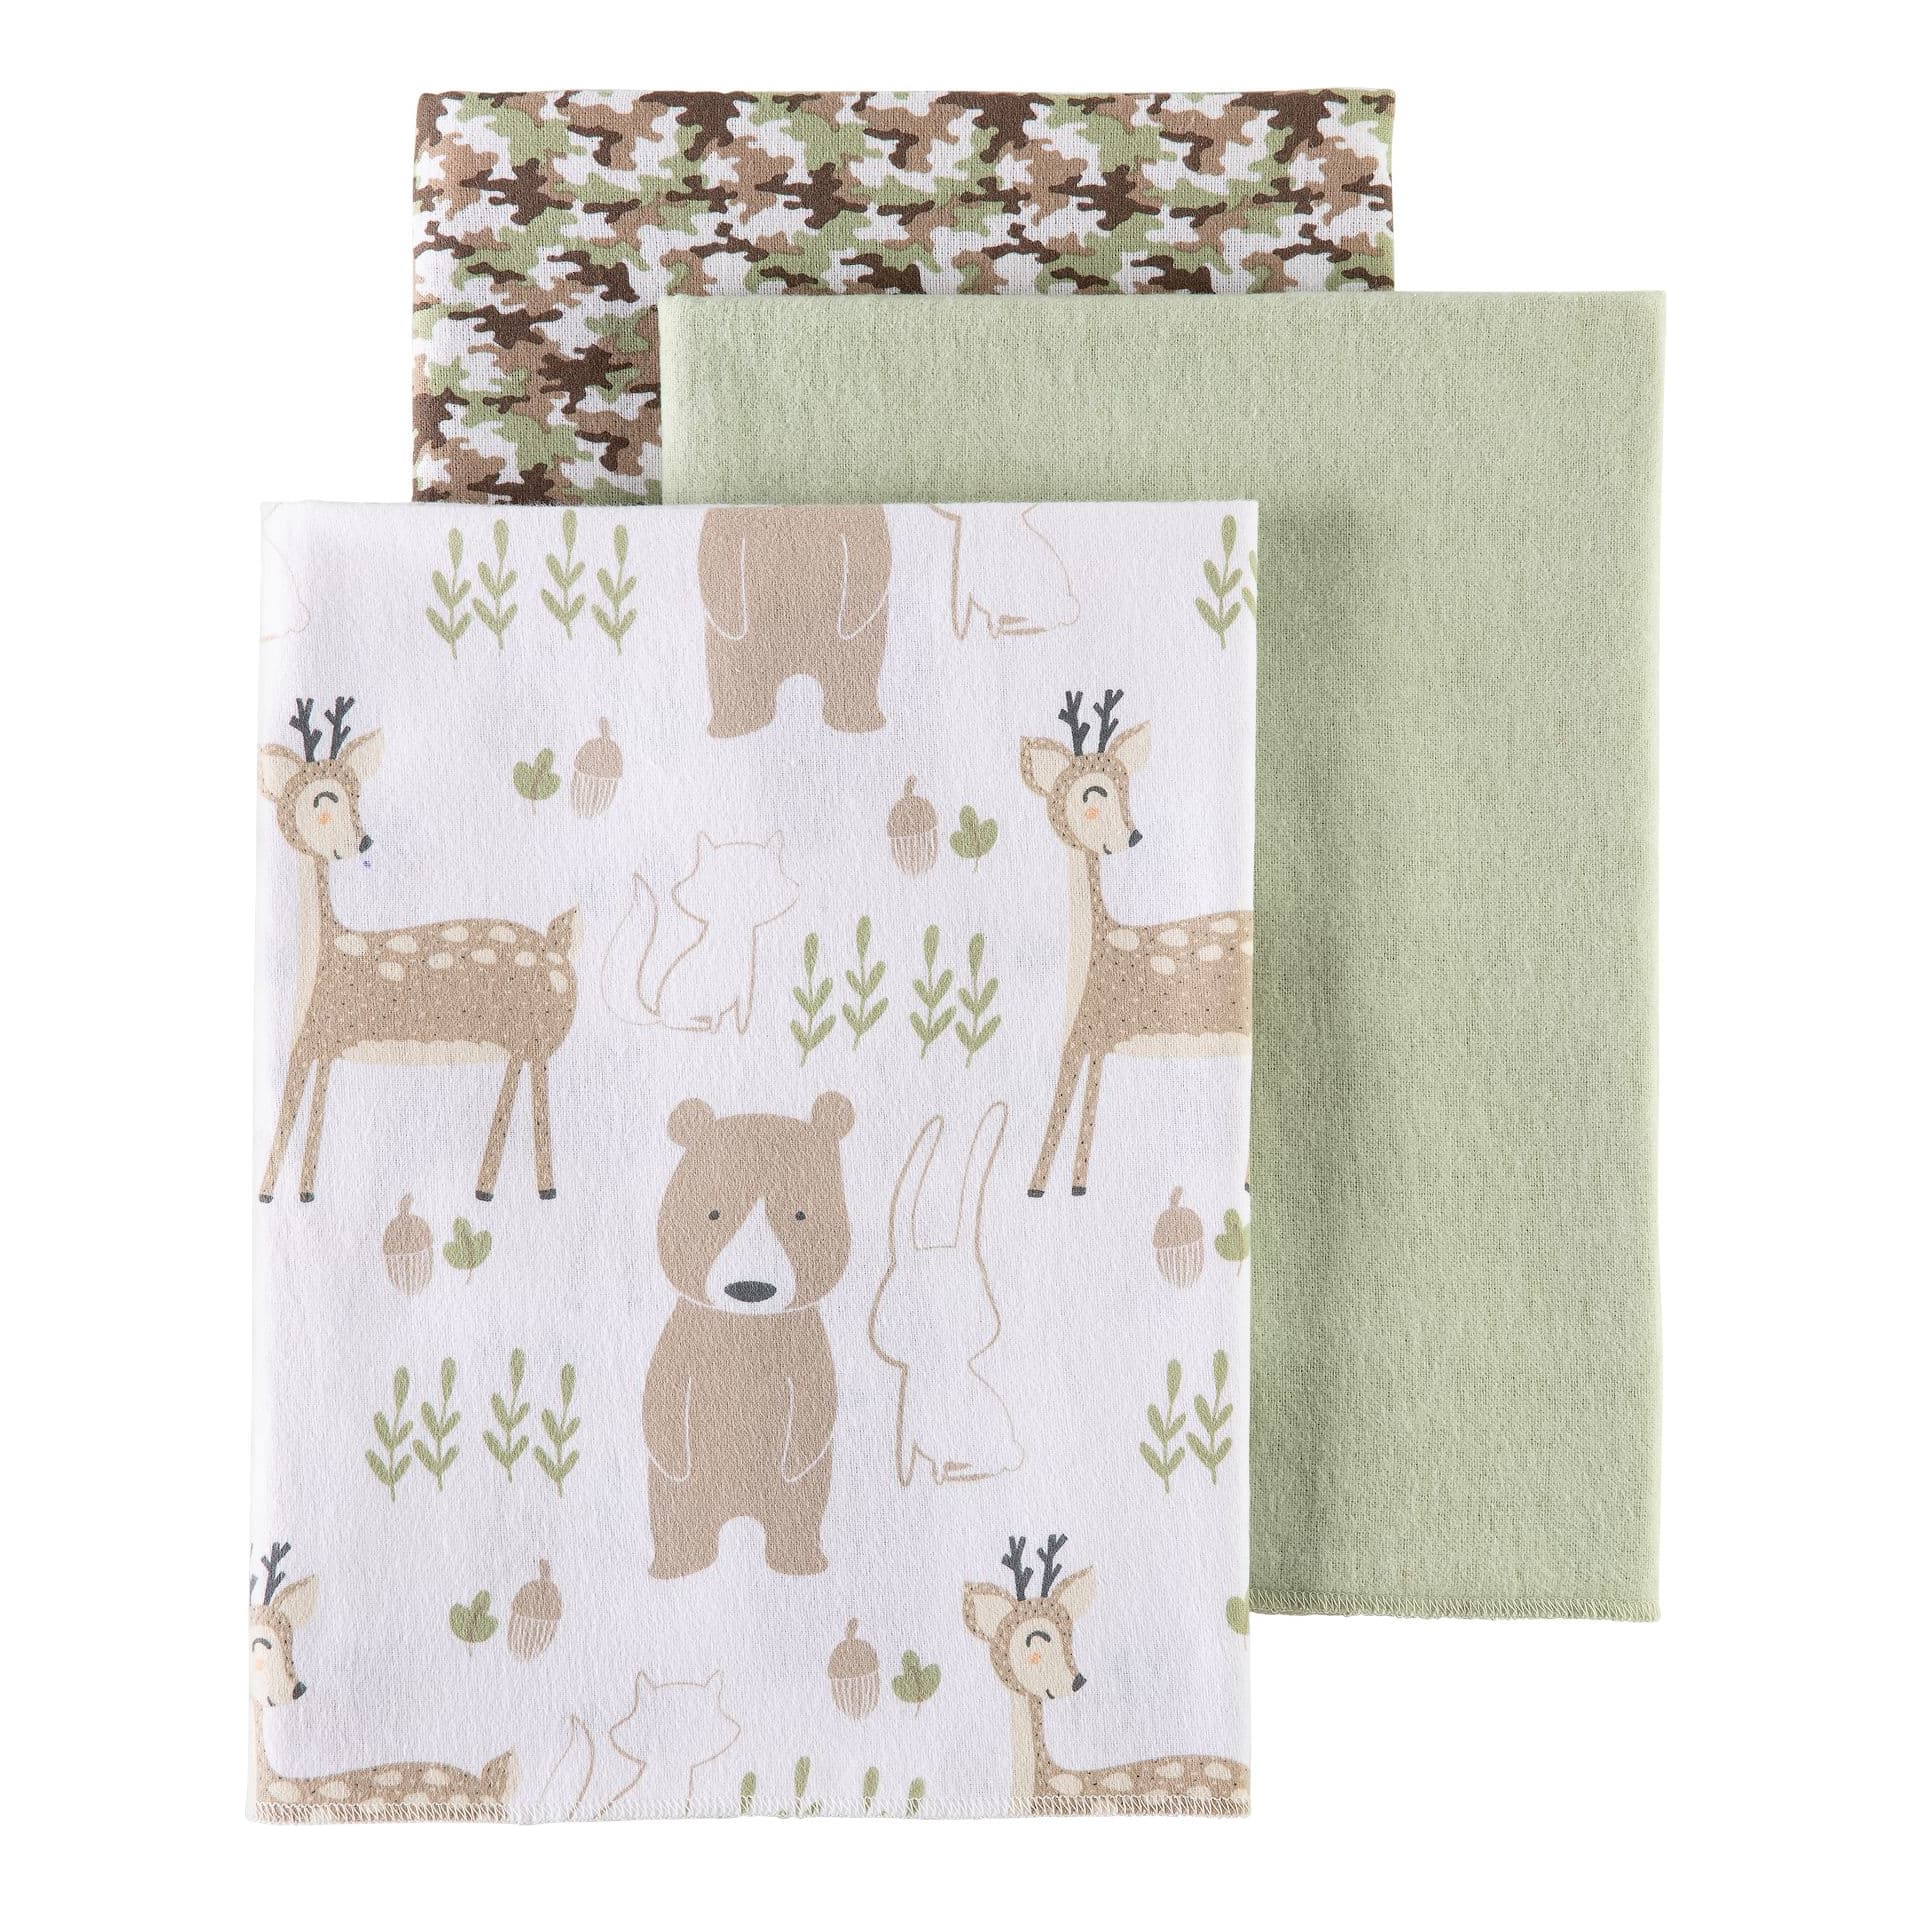 Bass Pro Shops® Baby Receiving Blanket 3-Pack - Woodland